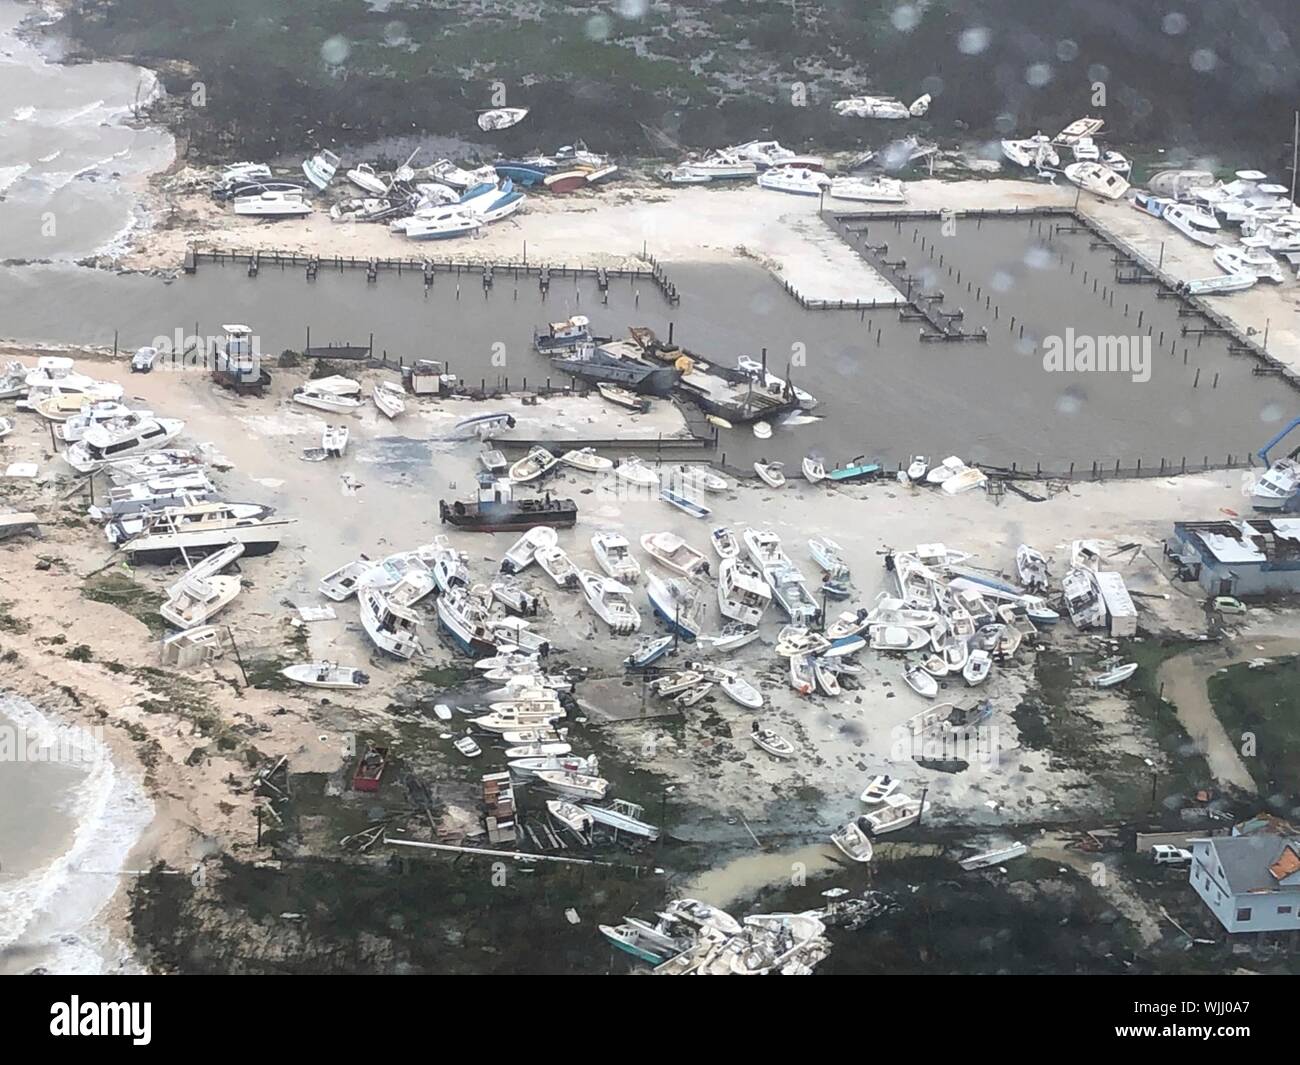 Marsh Harbour, Abaco, Bahamas. 02 September, 2019. Boats are tossed across the land as Hurricane Dorian destroyed the Abaco Beach Resort & Boat Harbour September 2, 2019 in Marsh Harbour, Abaco, The Bahamas. Dorian struck the small island nation as a Category 5 storm with winds of 185 mph.  Credit: Hunter Medley/USCG/Alamy Live News Stock Photo